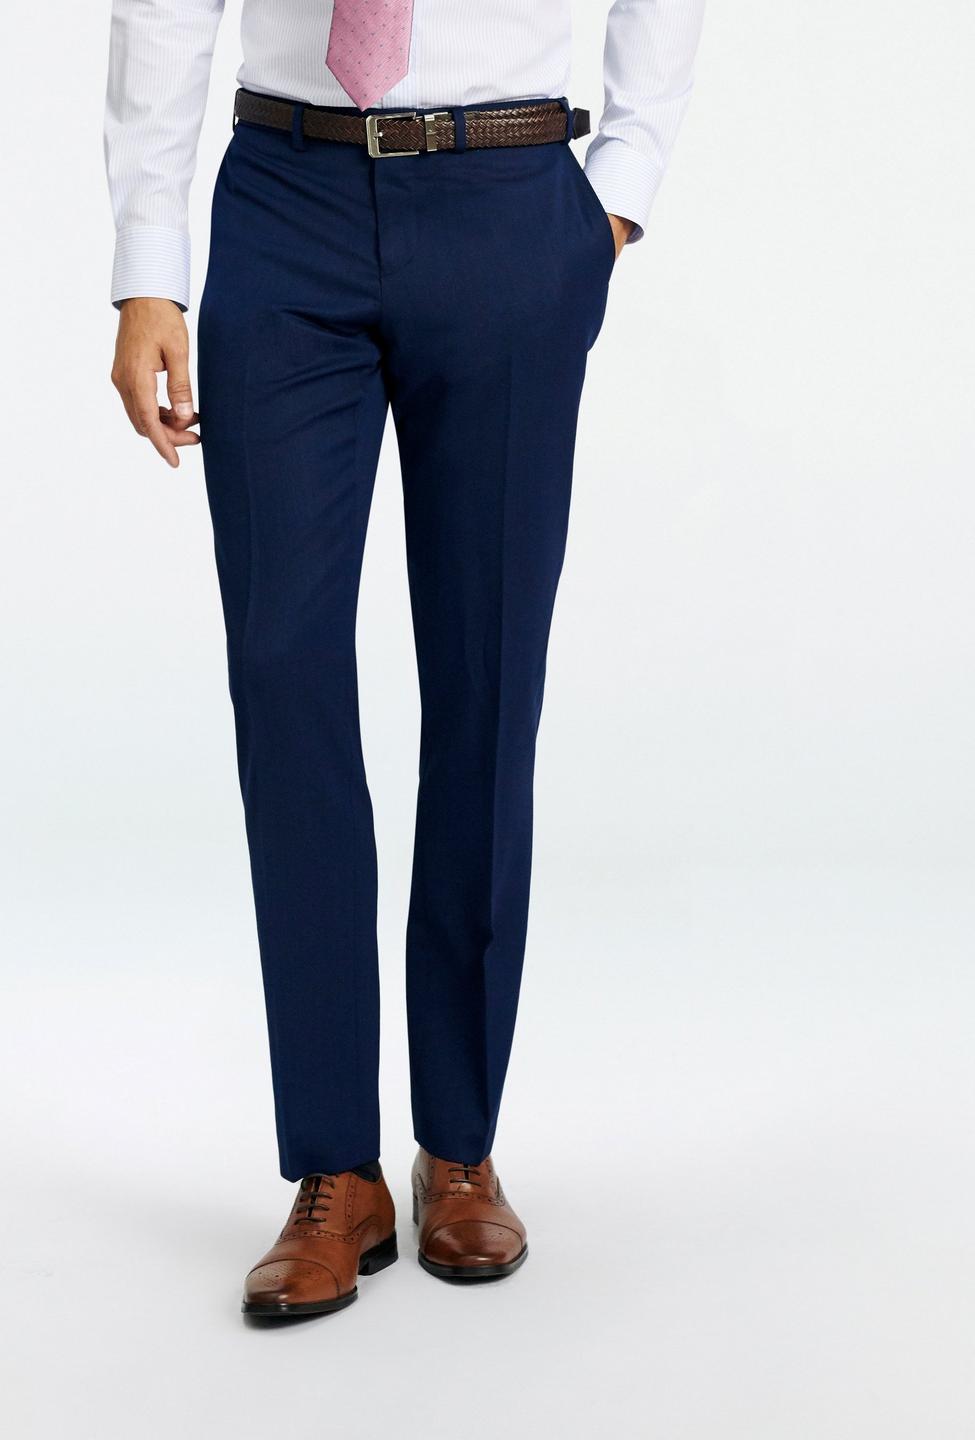 Hereford Cavalry Twill Blue Pants